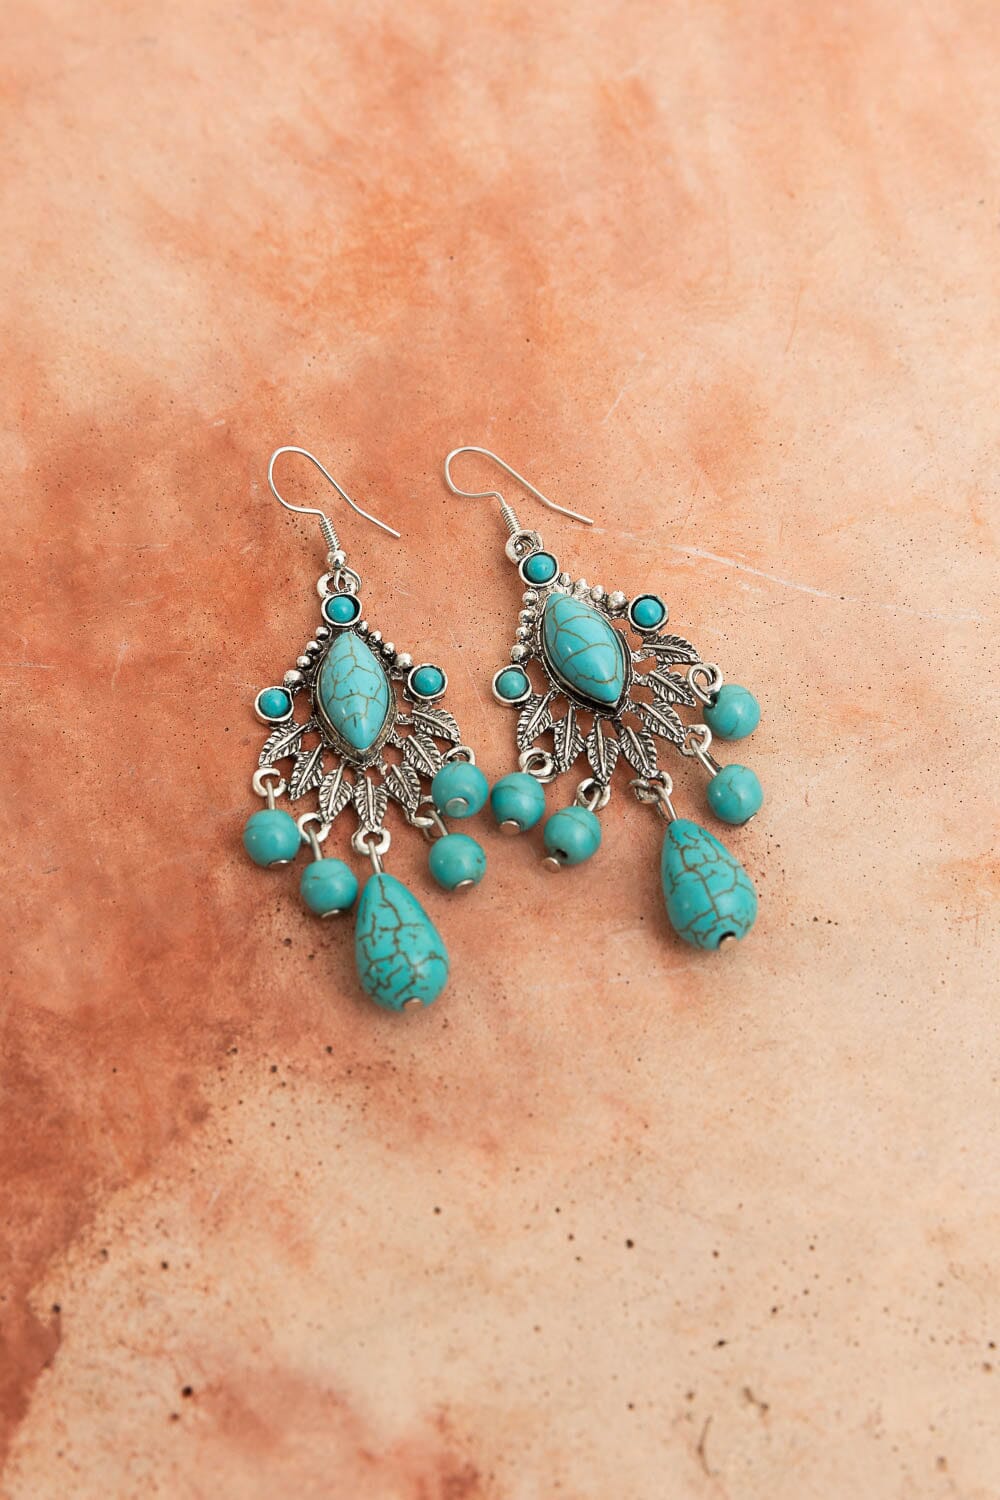 Vintage Turquoise Silver Chandelier Earrings Jewelry Leto Collection Turquoise 